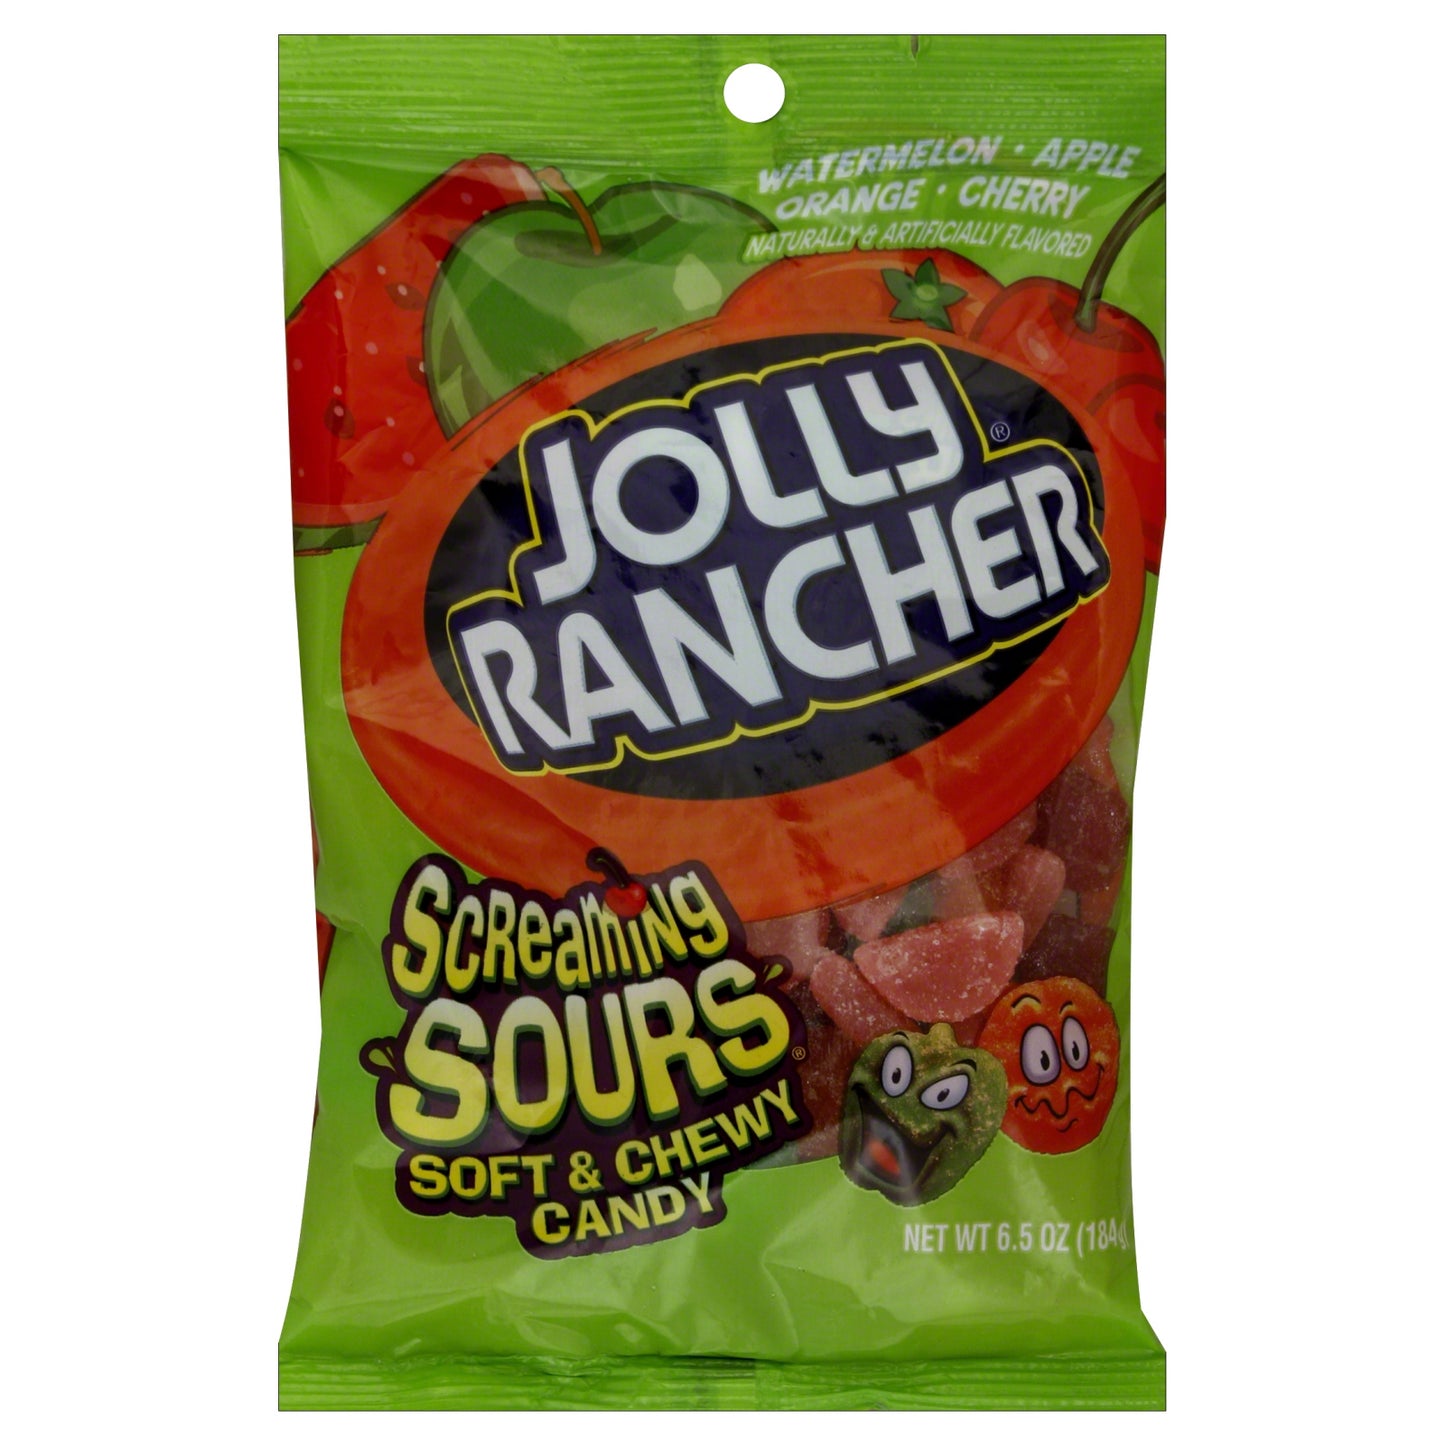 Jolly Rancher - Soft & Chewy Candy- Screaming Sours 6.50 oz